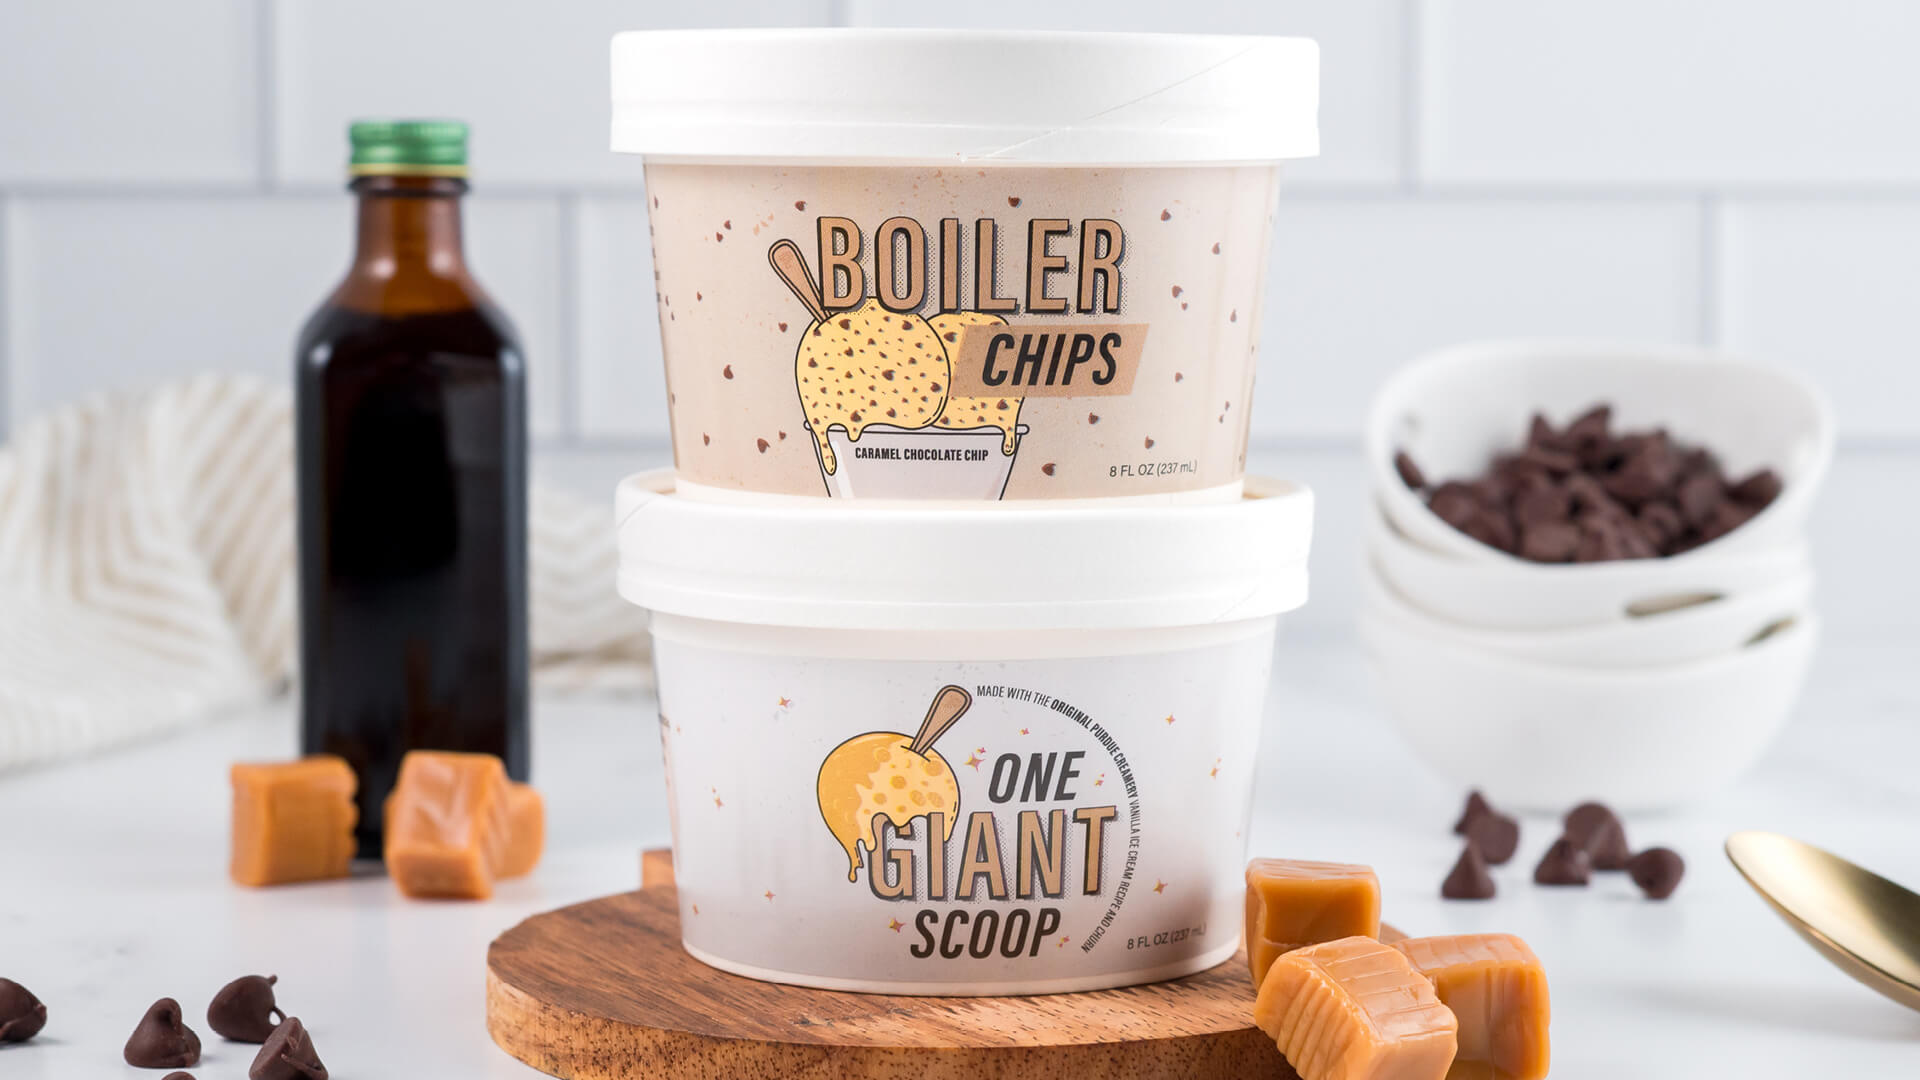 Boiler Chips and One Giant Scoop ice cream.